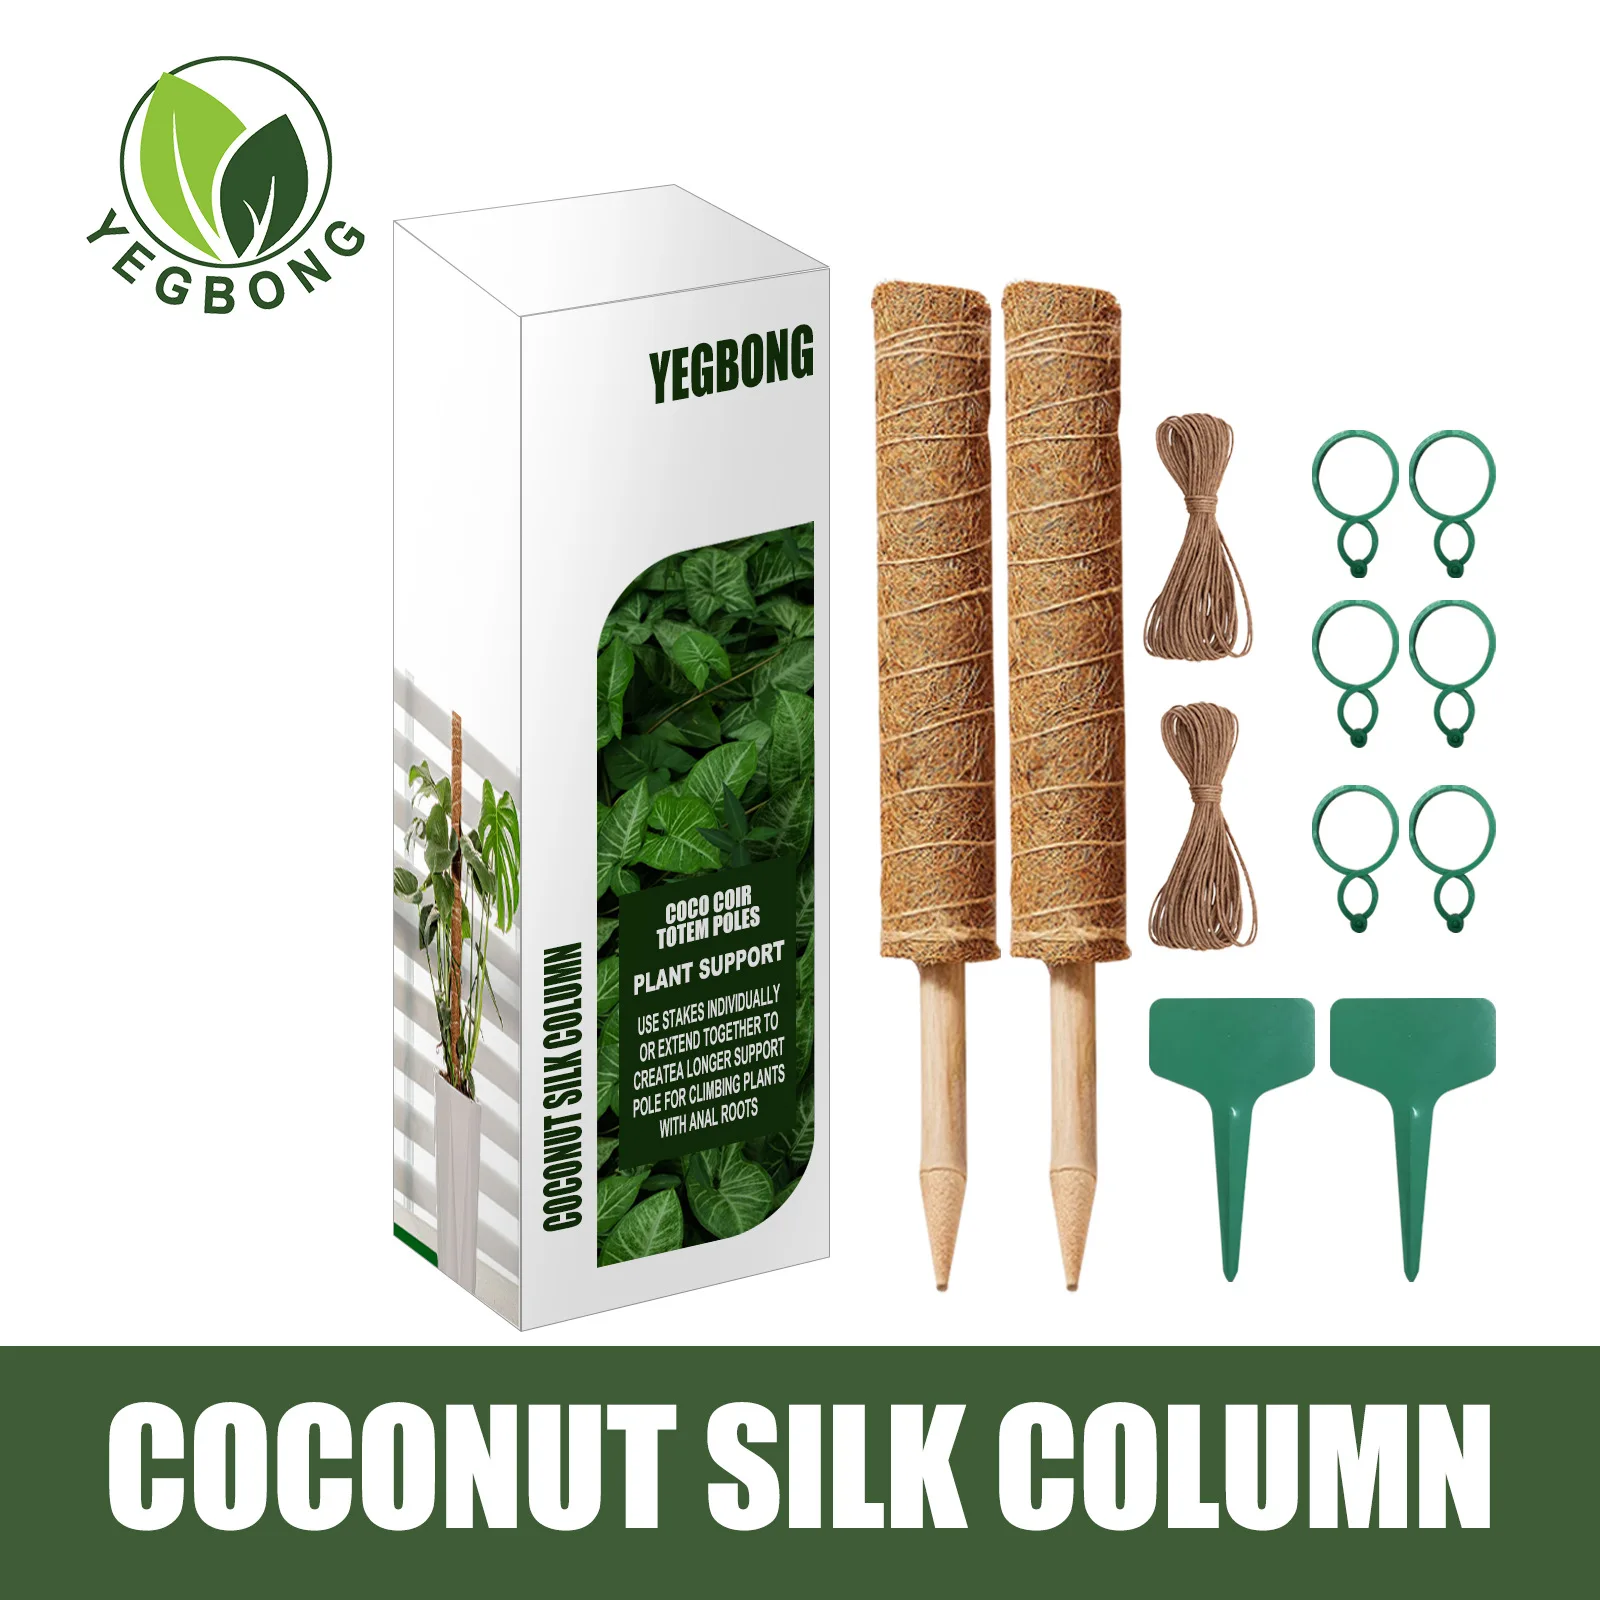 Free Shipping YEGBONG Coconut Shredding Column Set Plant Support Green Dill Palm Pole Pile Climbing Frame Bamboo Moss Tools